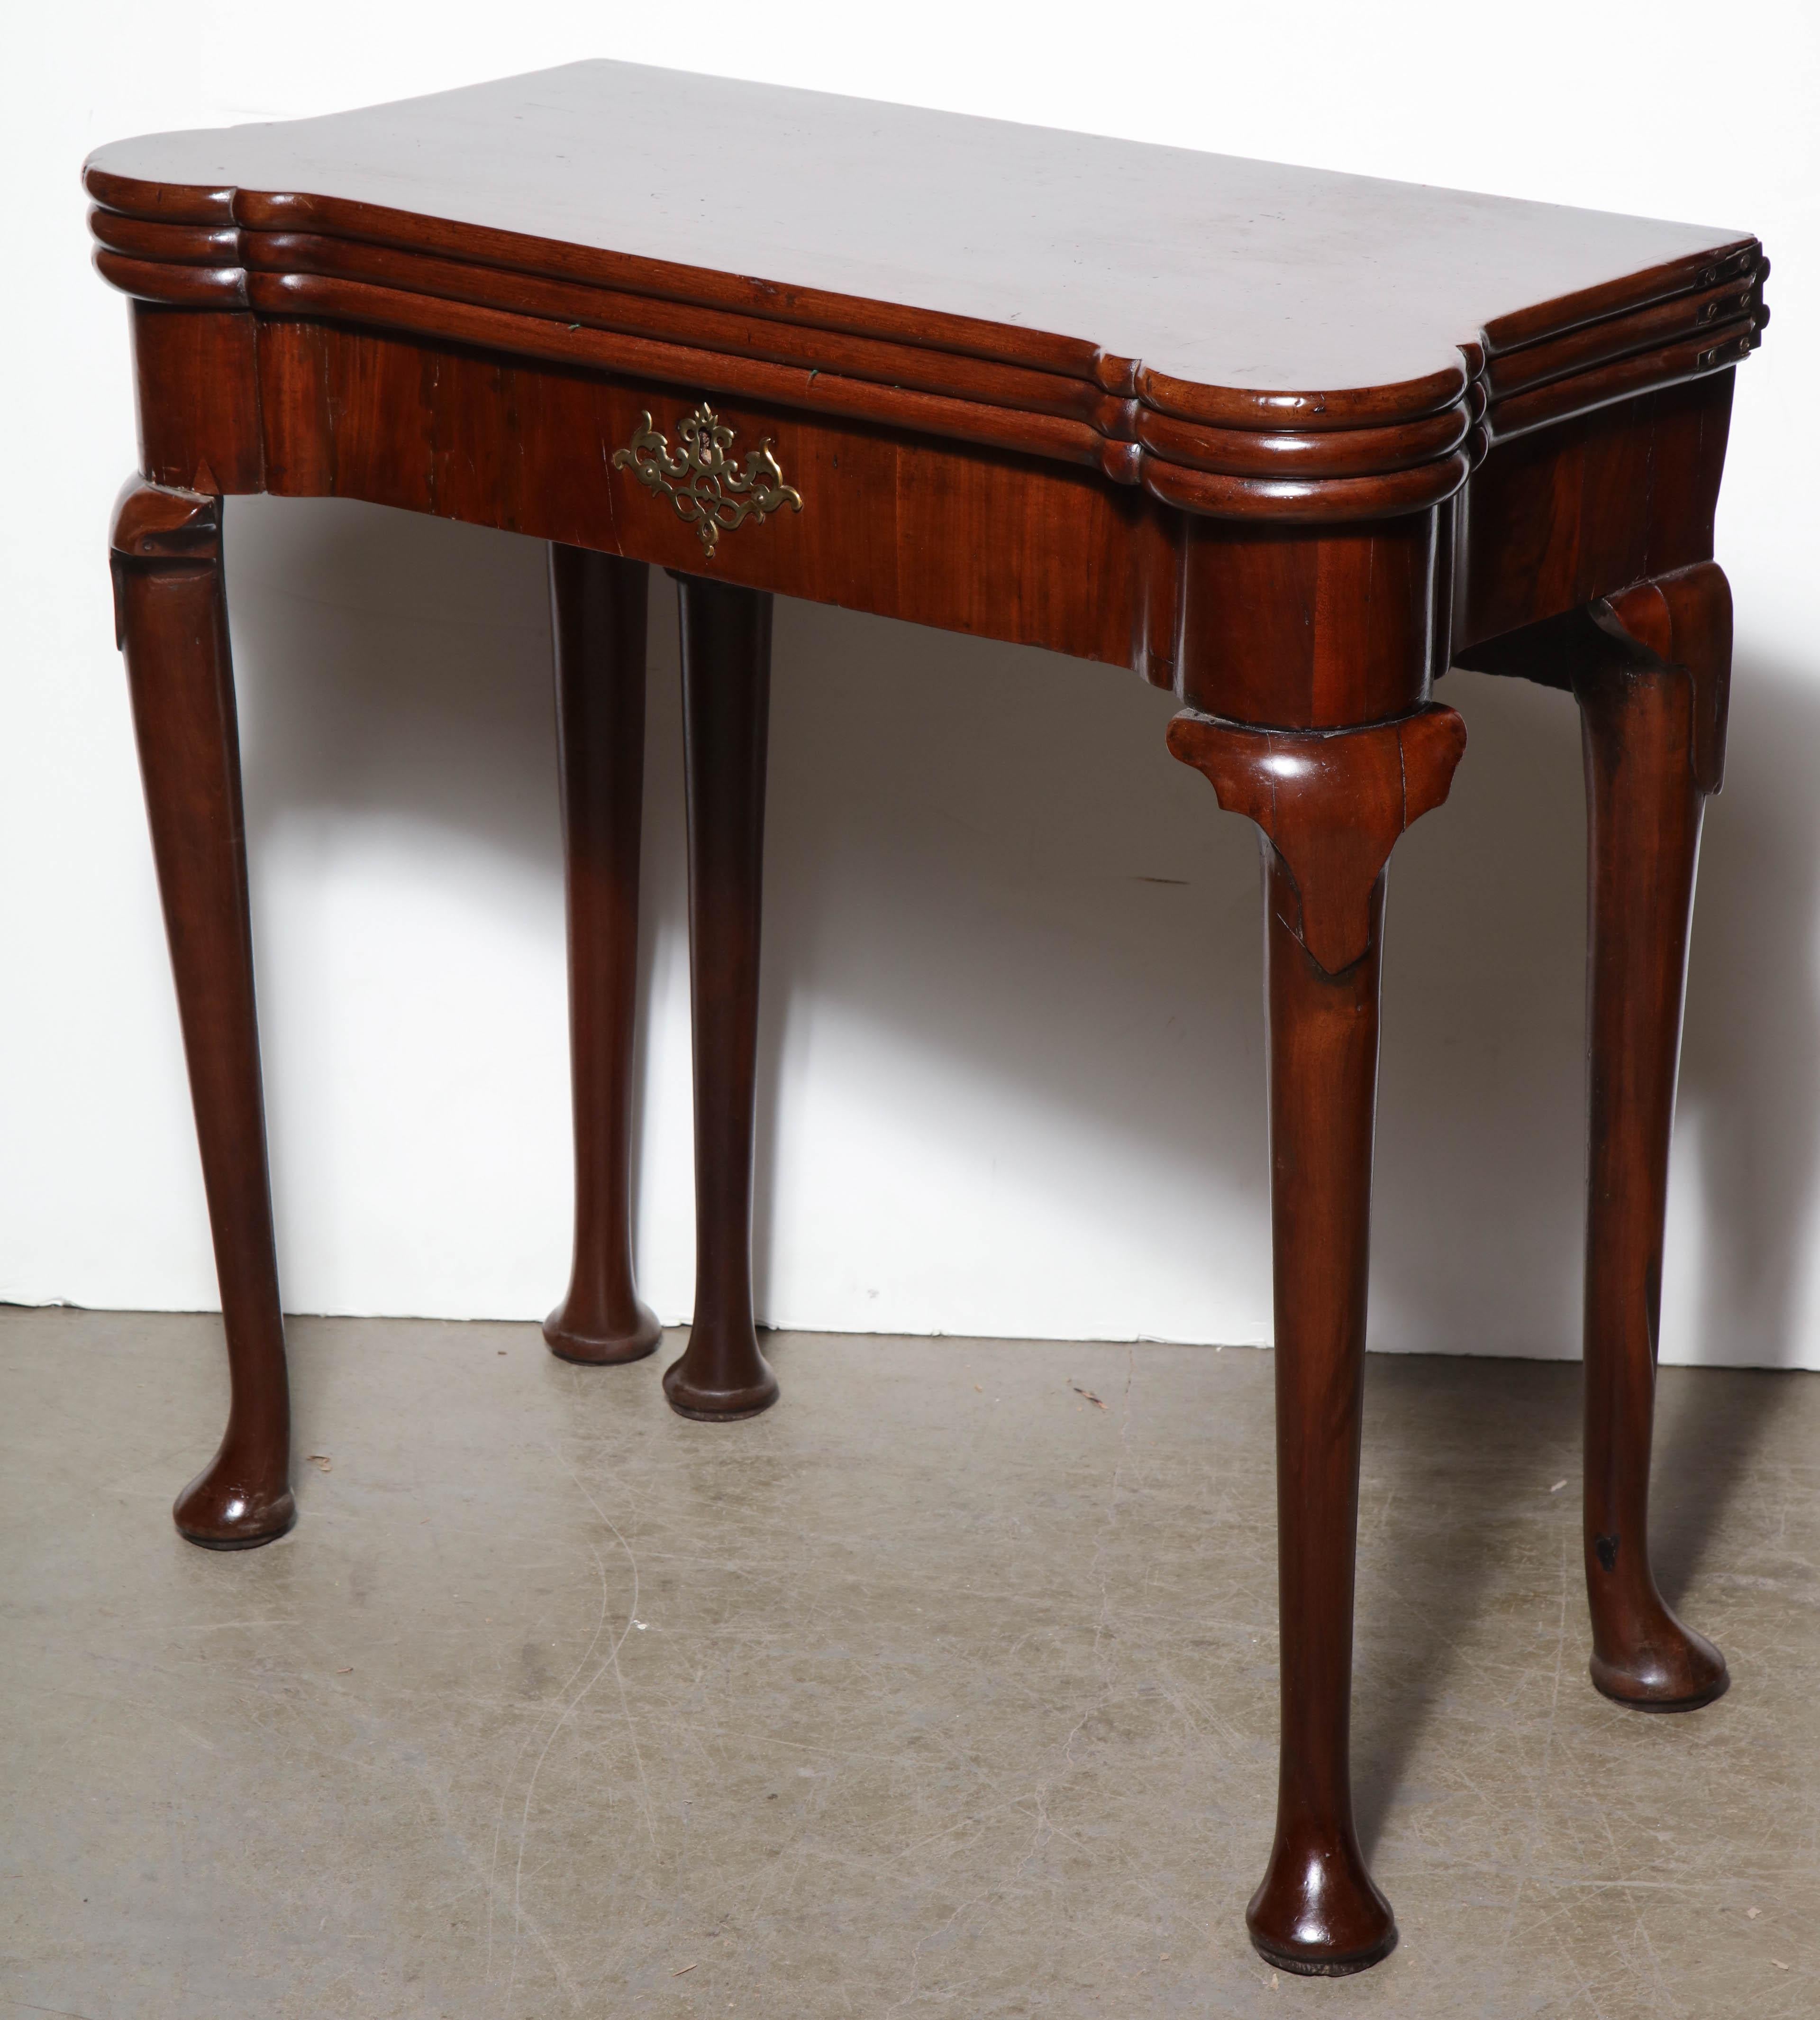 A rare English Queen Anne mahogany triple top card table with turret corners, pocket fitted interior and a storage well.